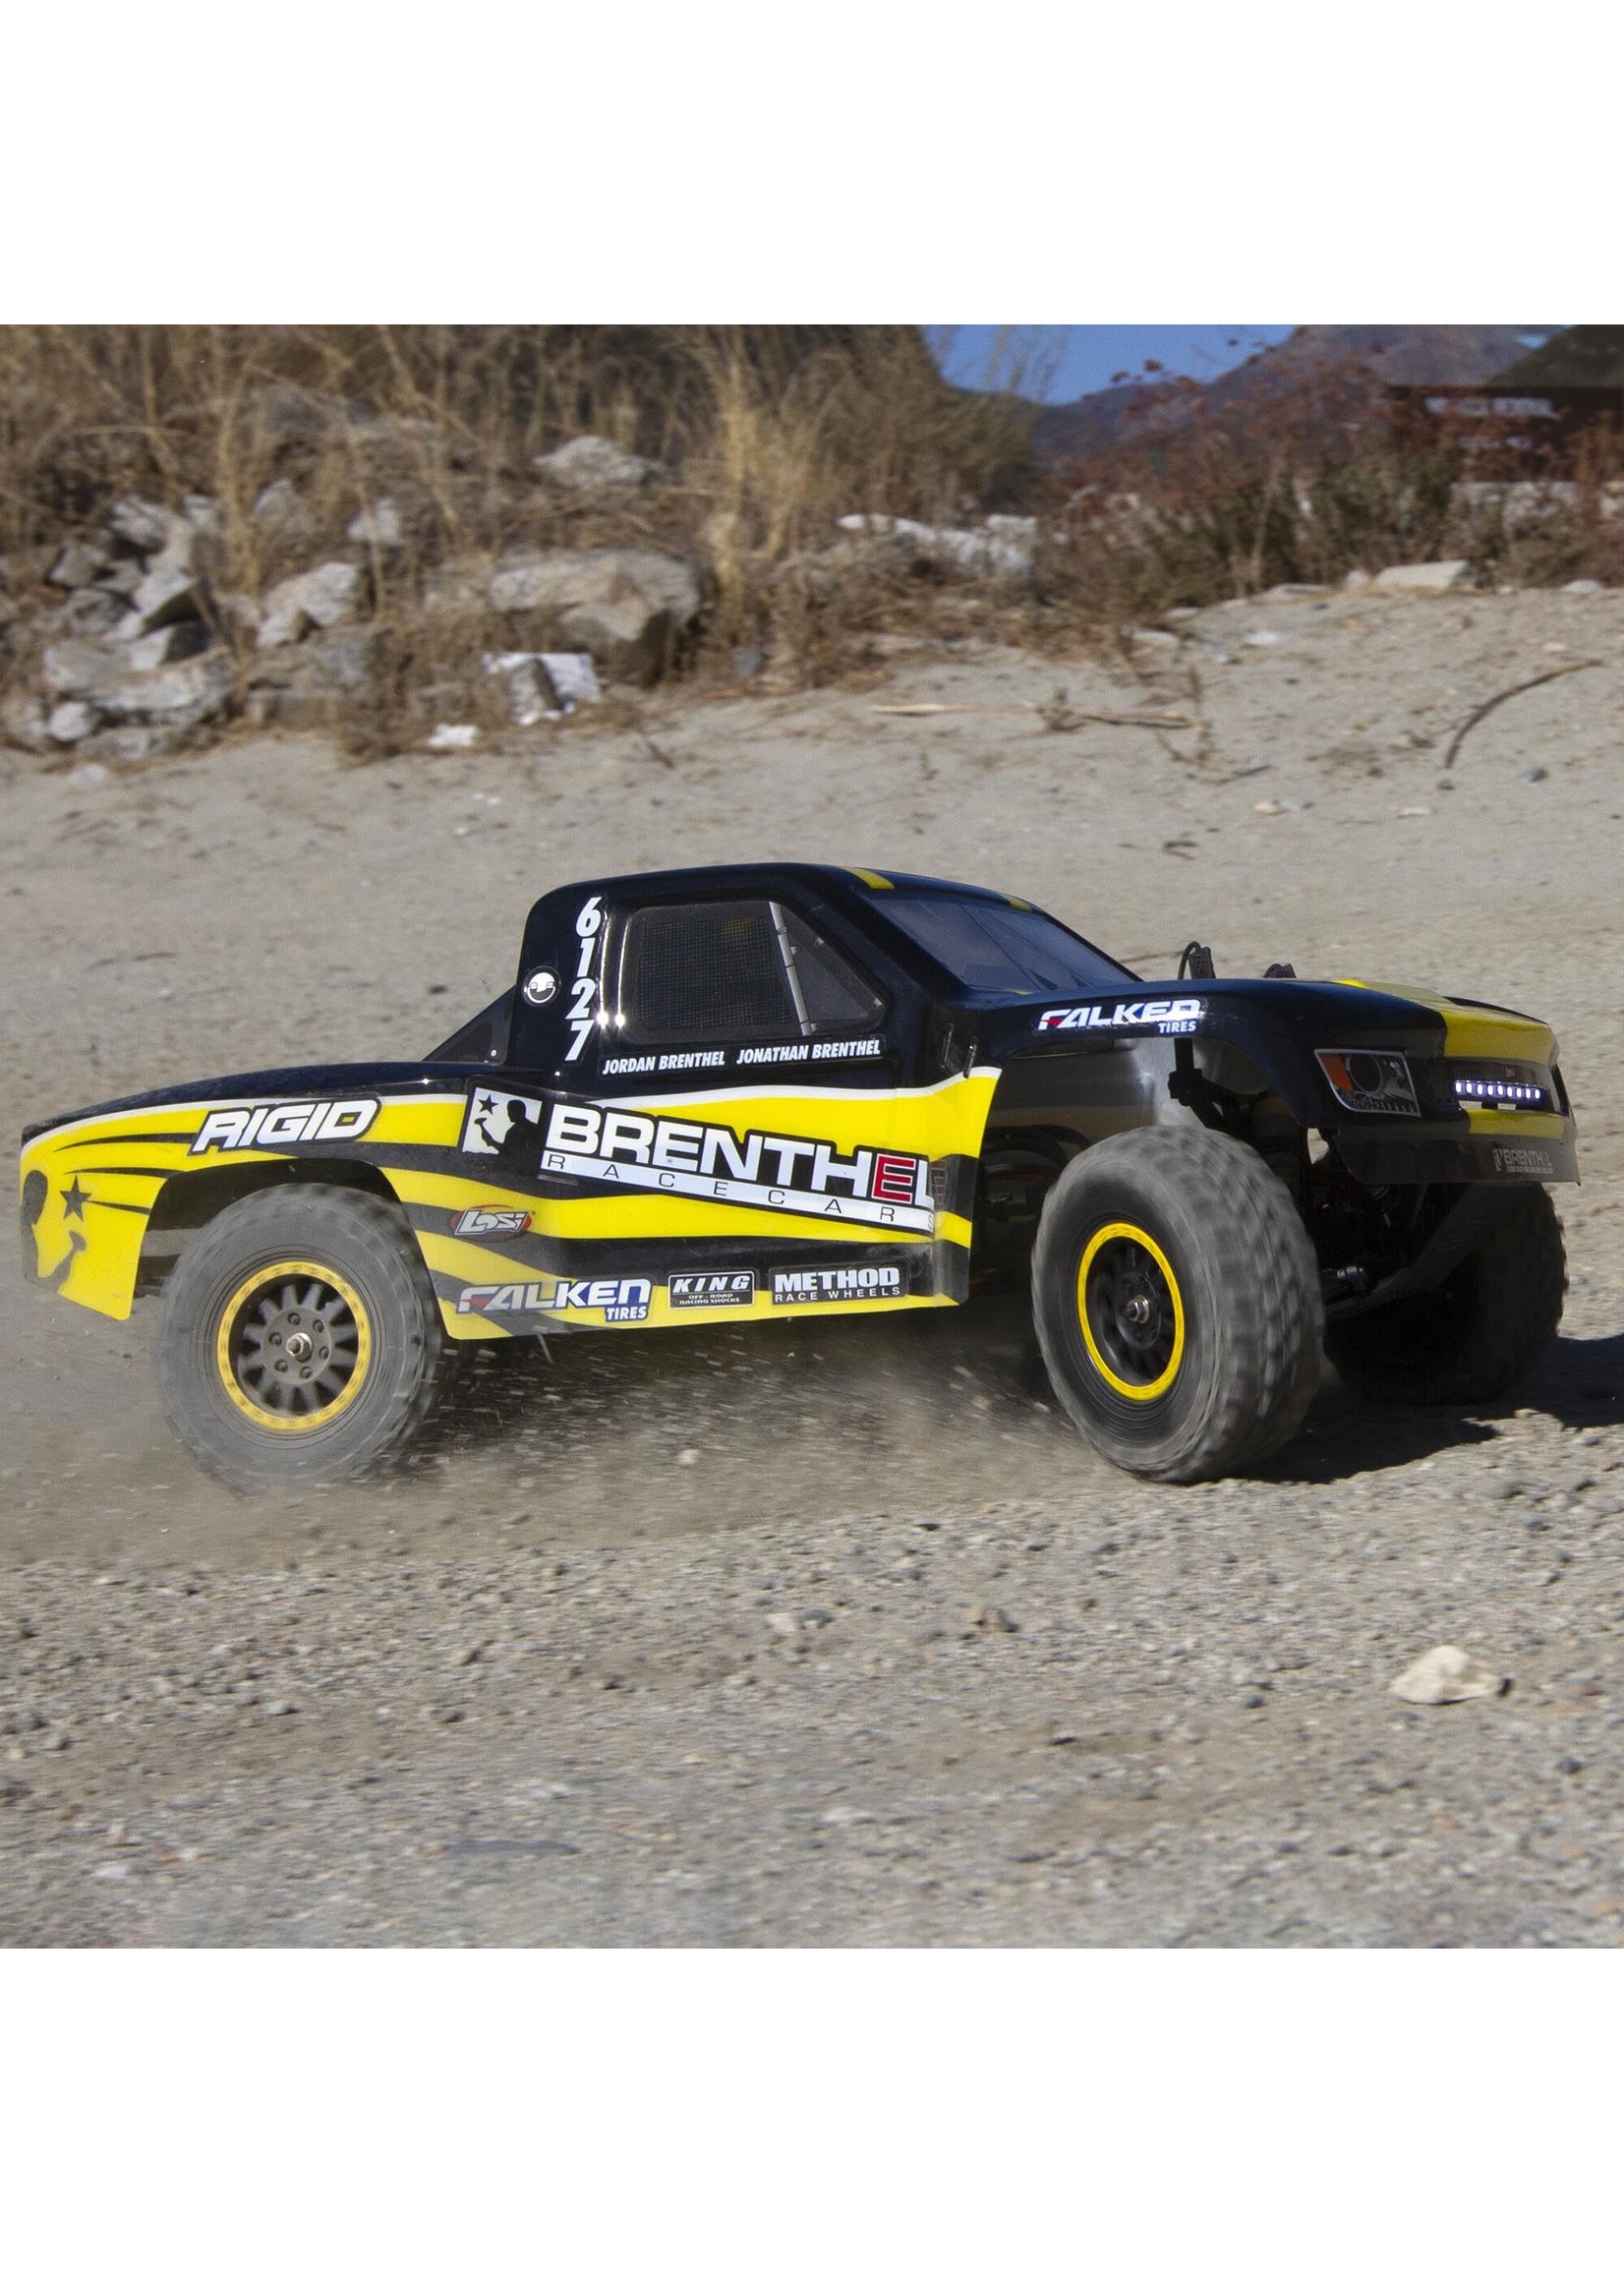 Losi 1/10 TENACITY TT Pro 4WD Brushless SCT RTR with DX3 & Smart - Brenthel